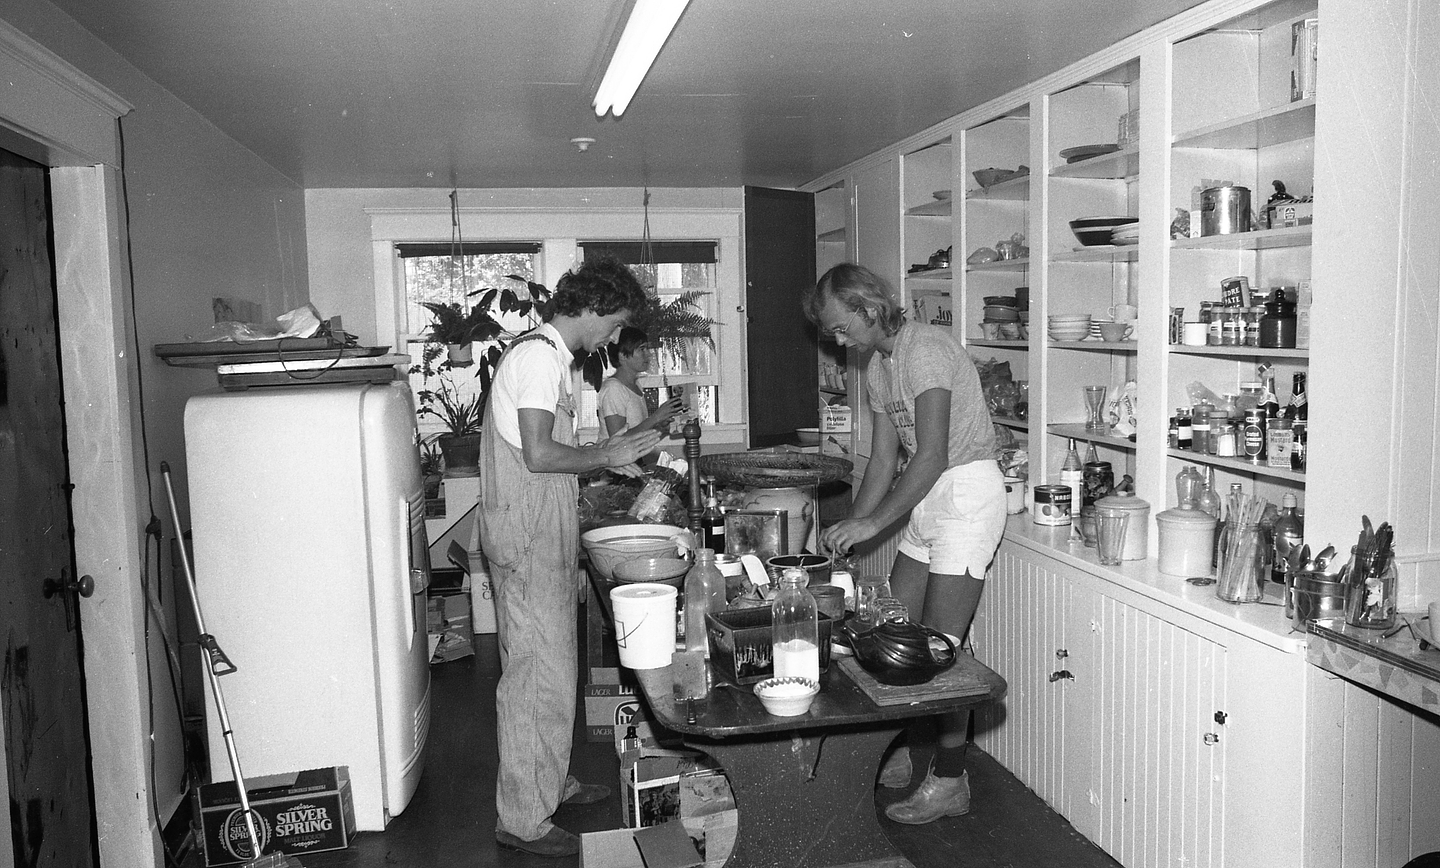 A black and white photograph of Warren Knechtel, Kate Craig and Vincent Trasov standing around a table in the kitchen, preparing food.